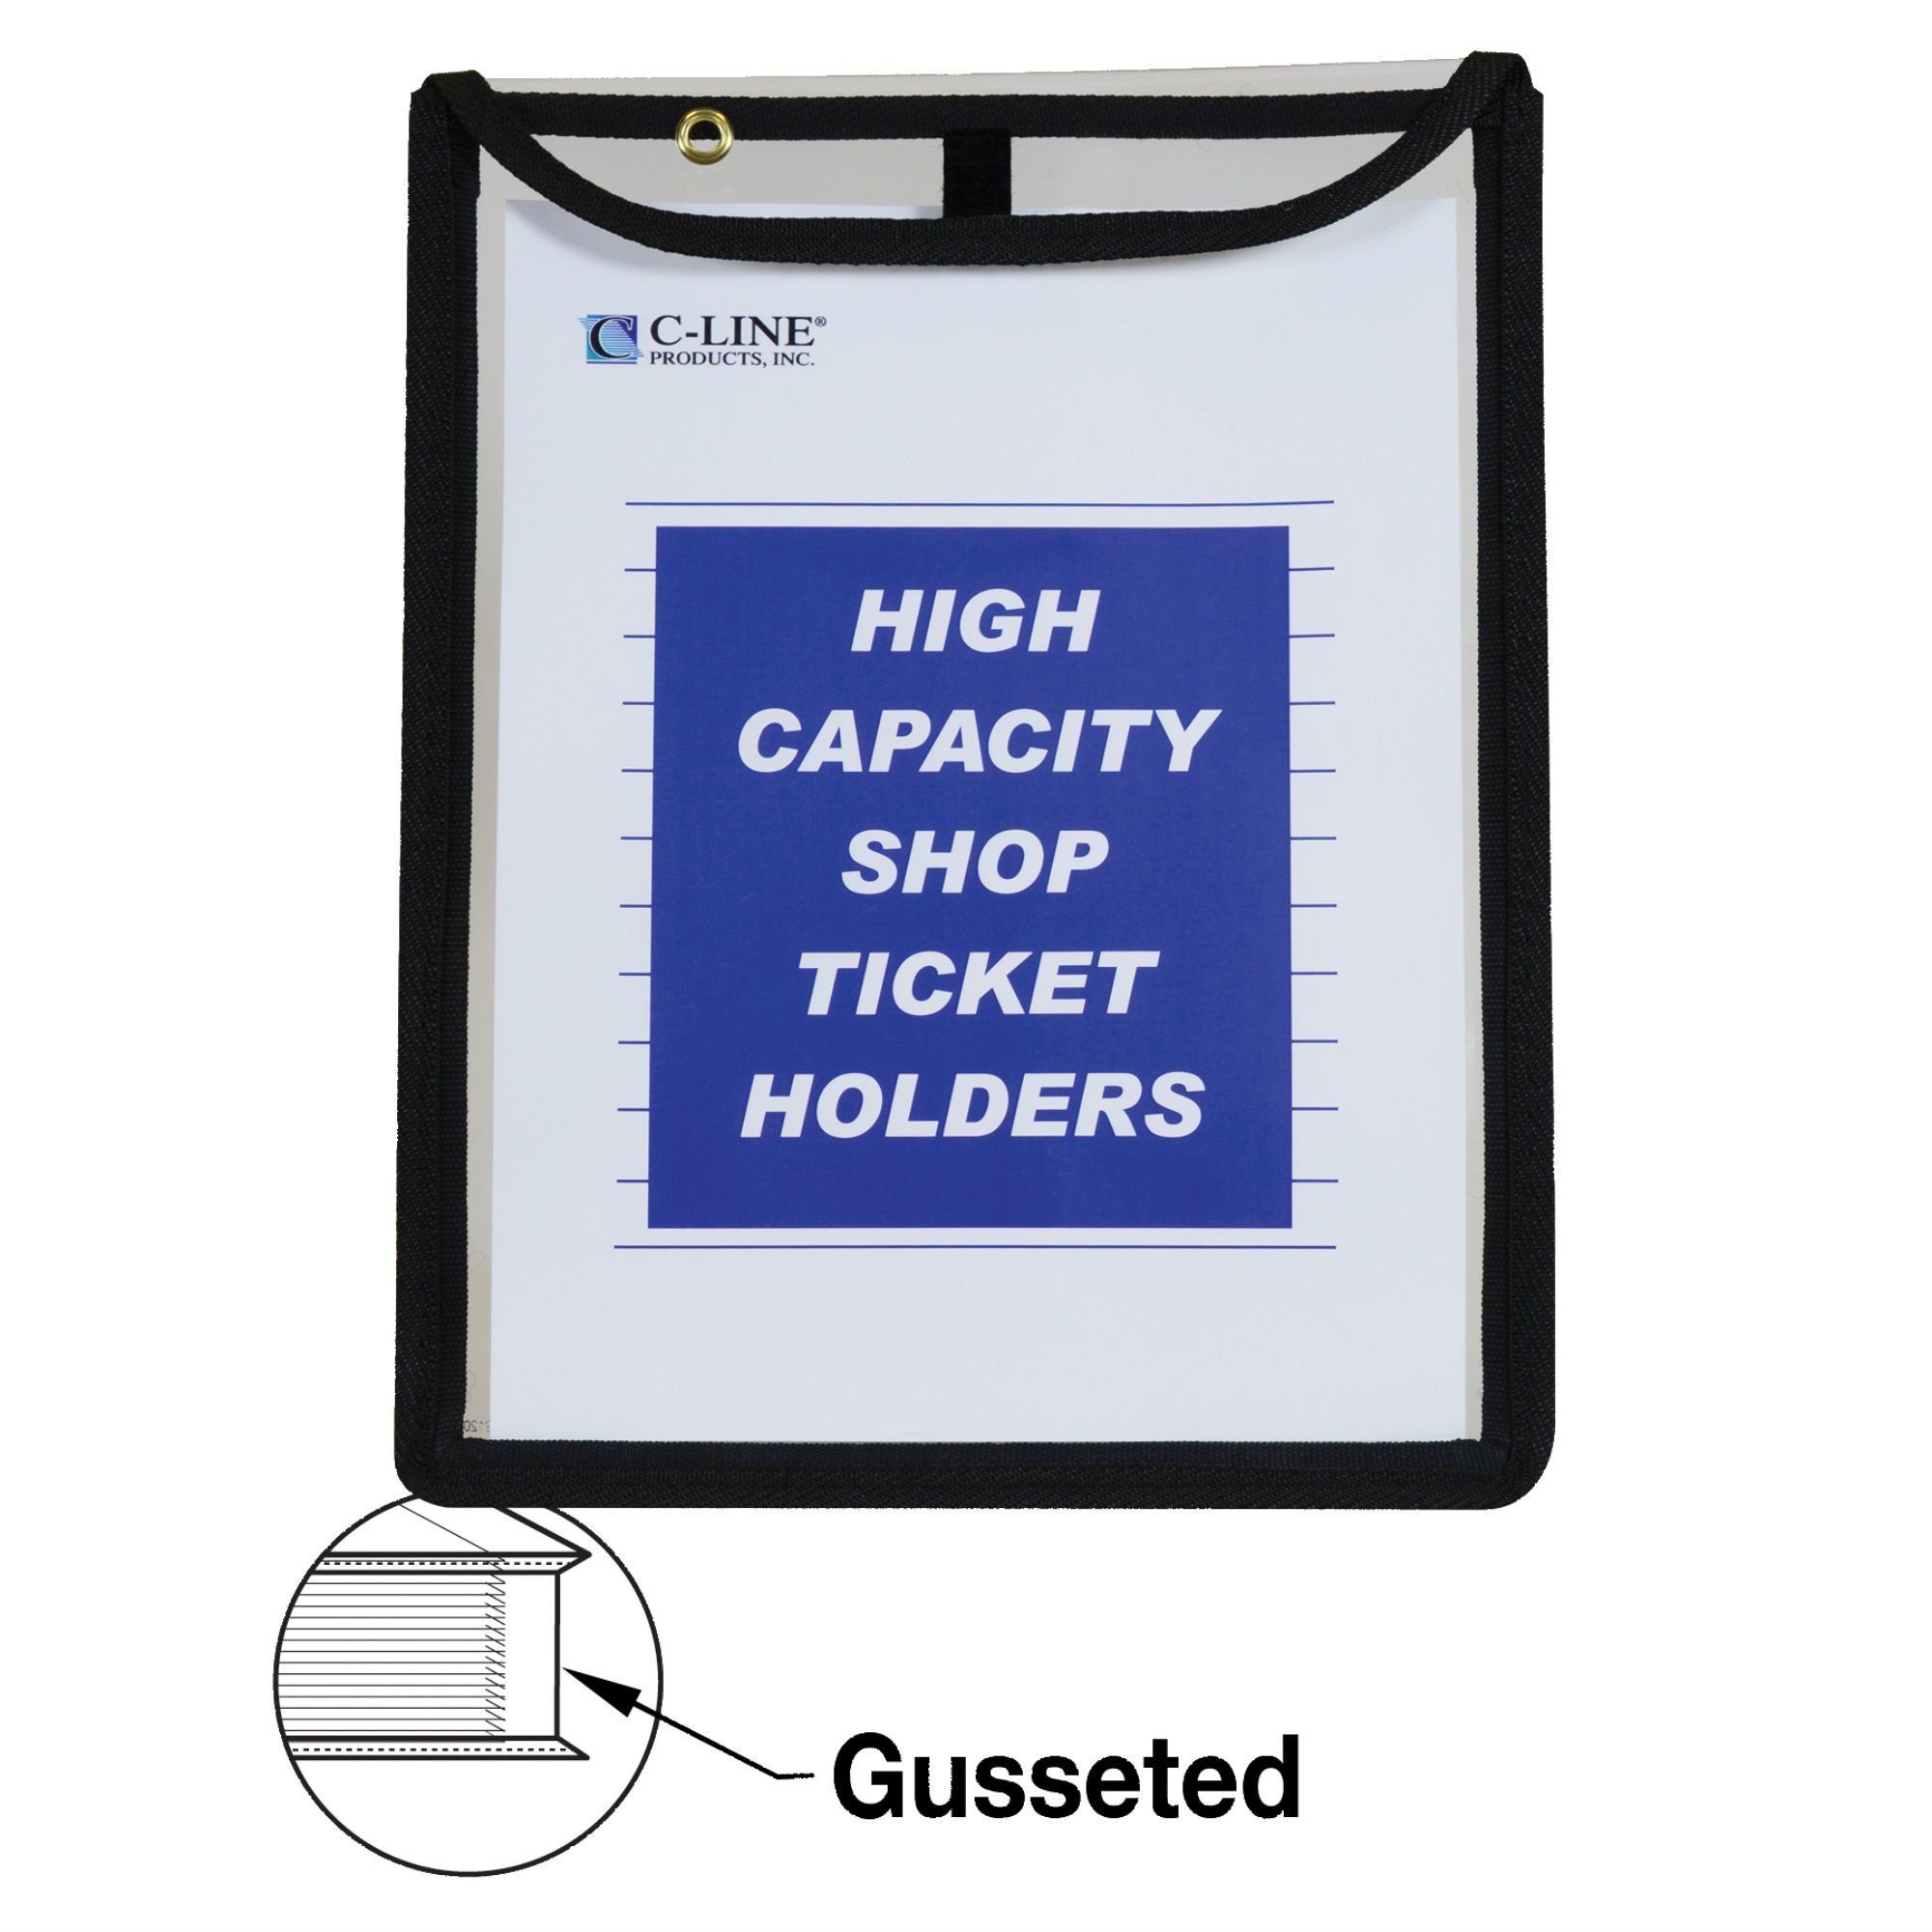 C-Line Shop Ticket Holder, Gusseted, Stitched, both sides clear, 9 x 12 x 1, 15/BX, 39912